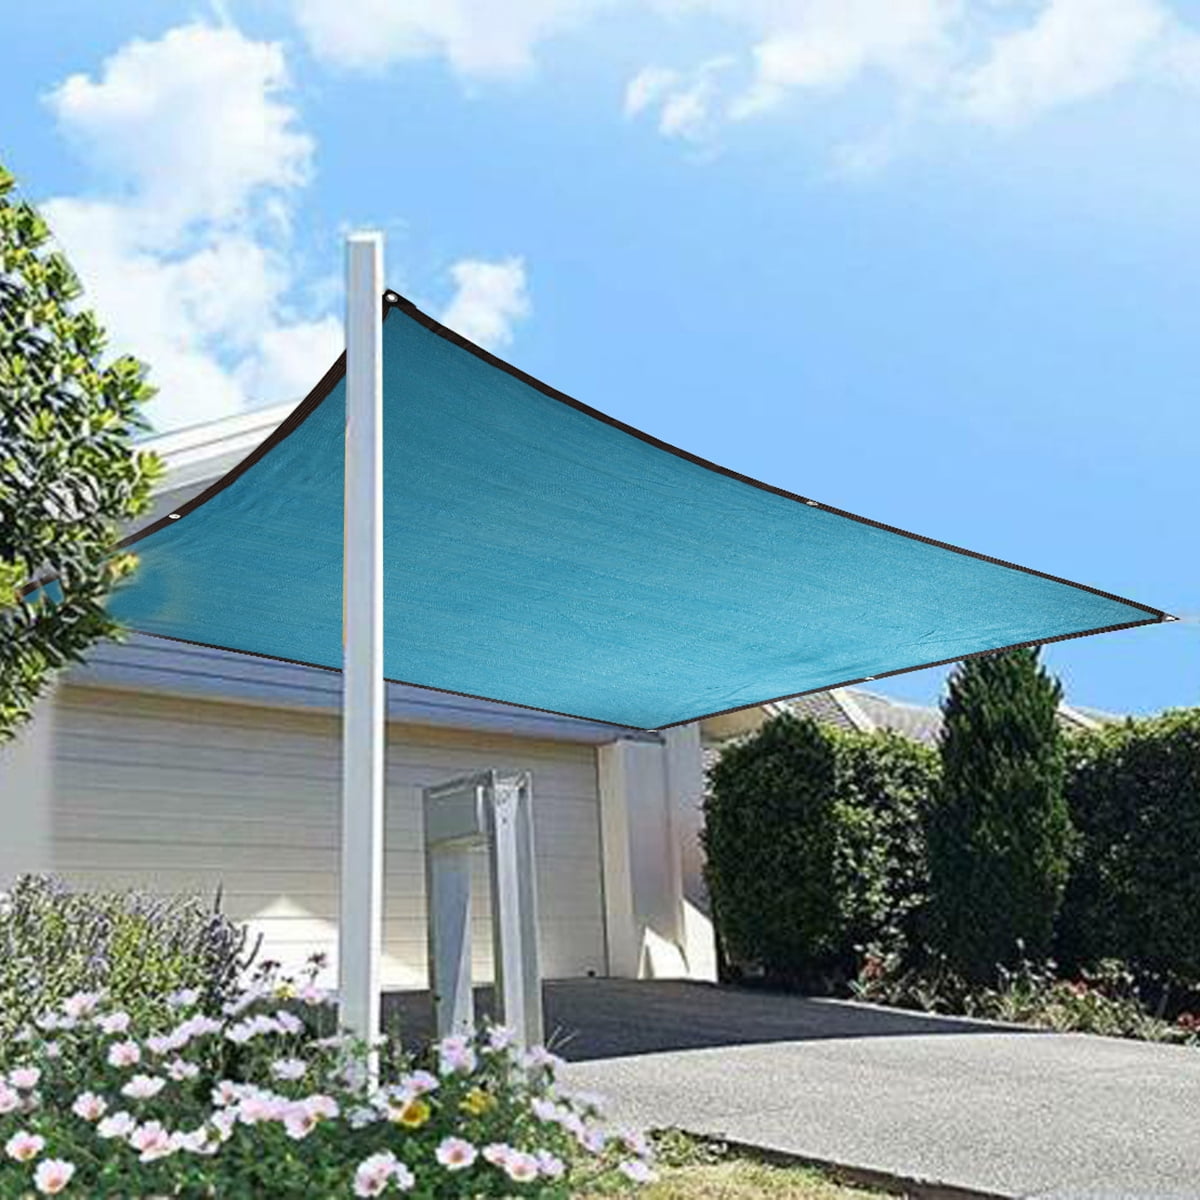 400D Sun Shade Sail Canopy Patio Lawn Yard UV Block Top Cover Outdoor Rectangle 